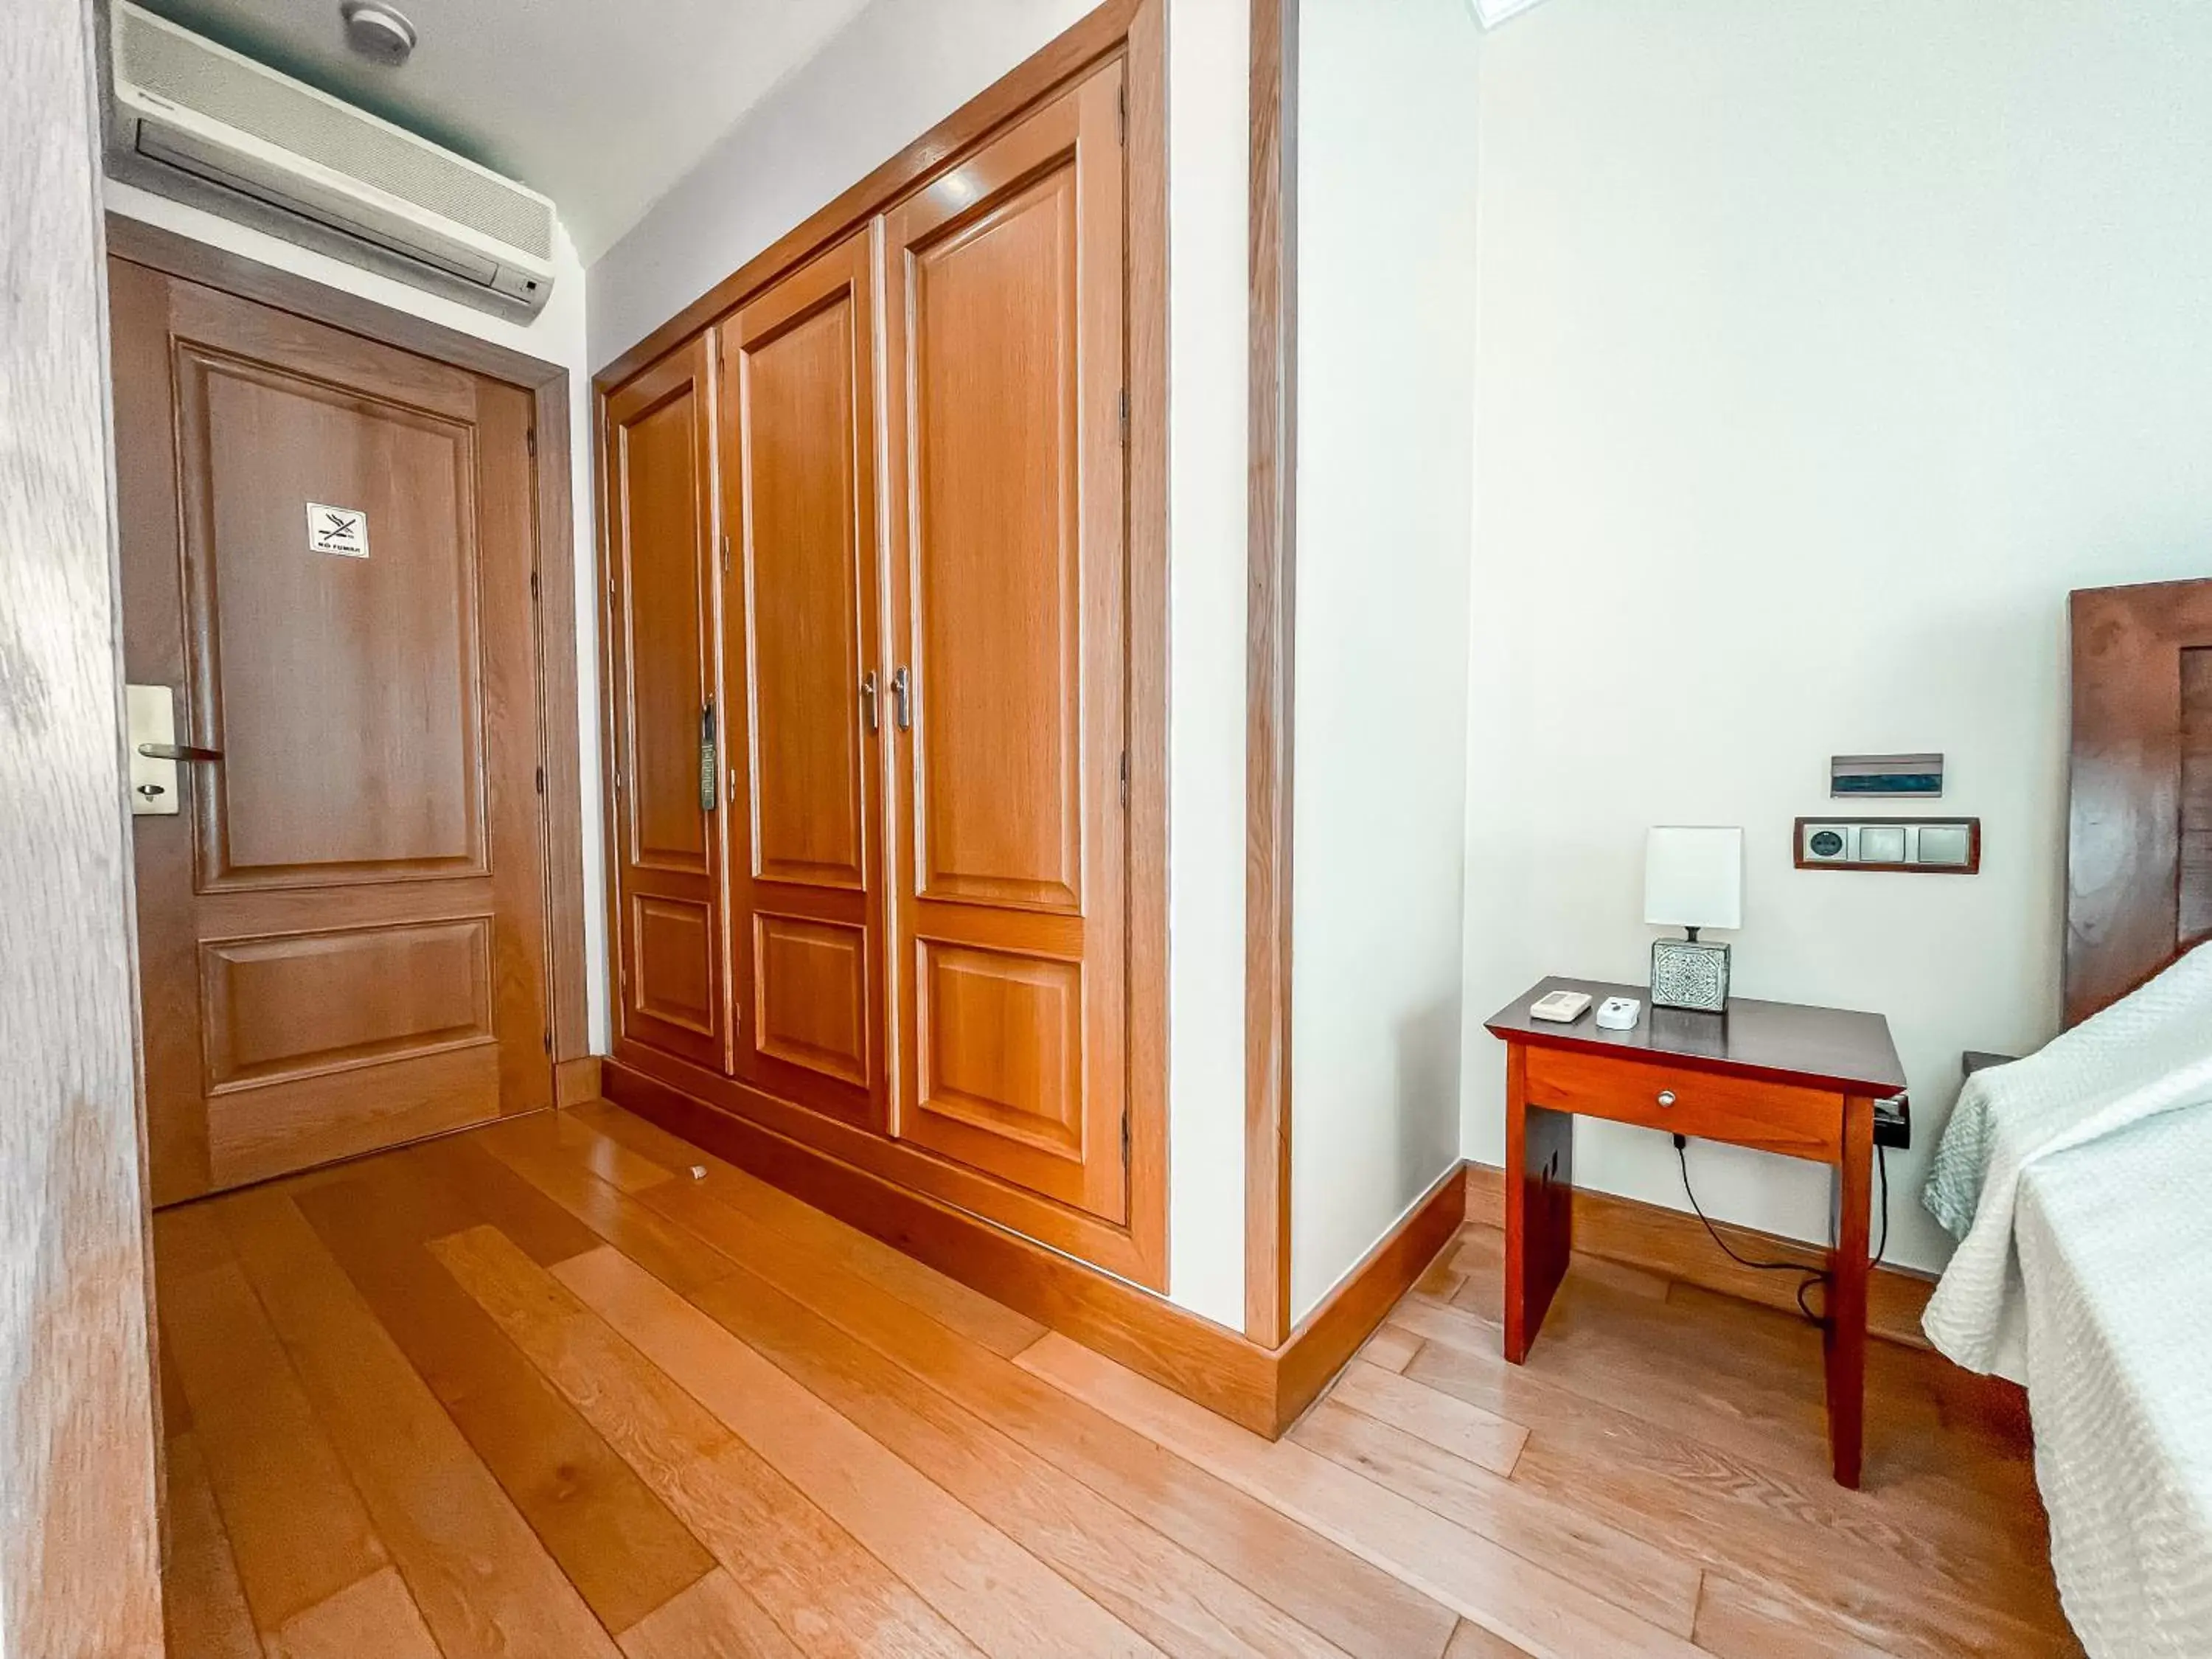 wardrobe, TV/Entertainment Center in The Marbella Heights Boutique Hotel